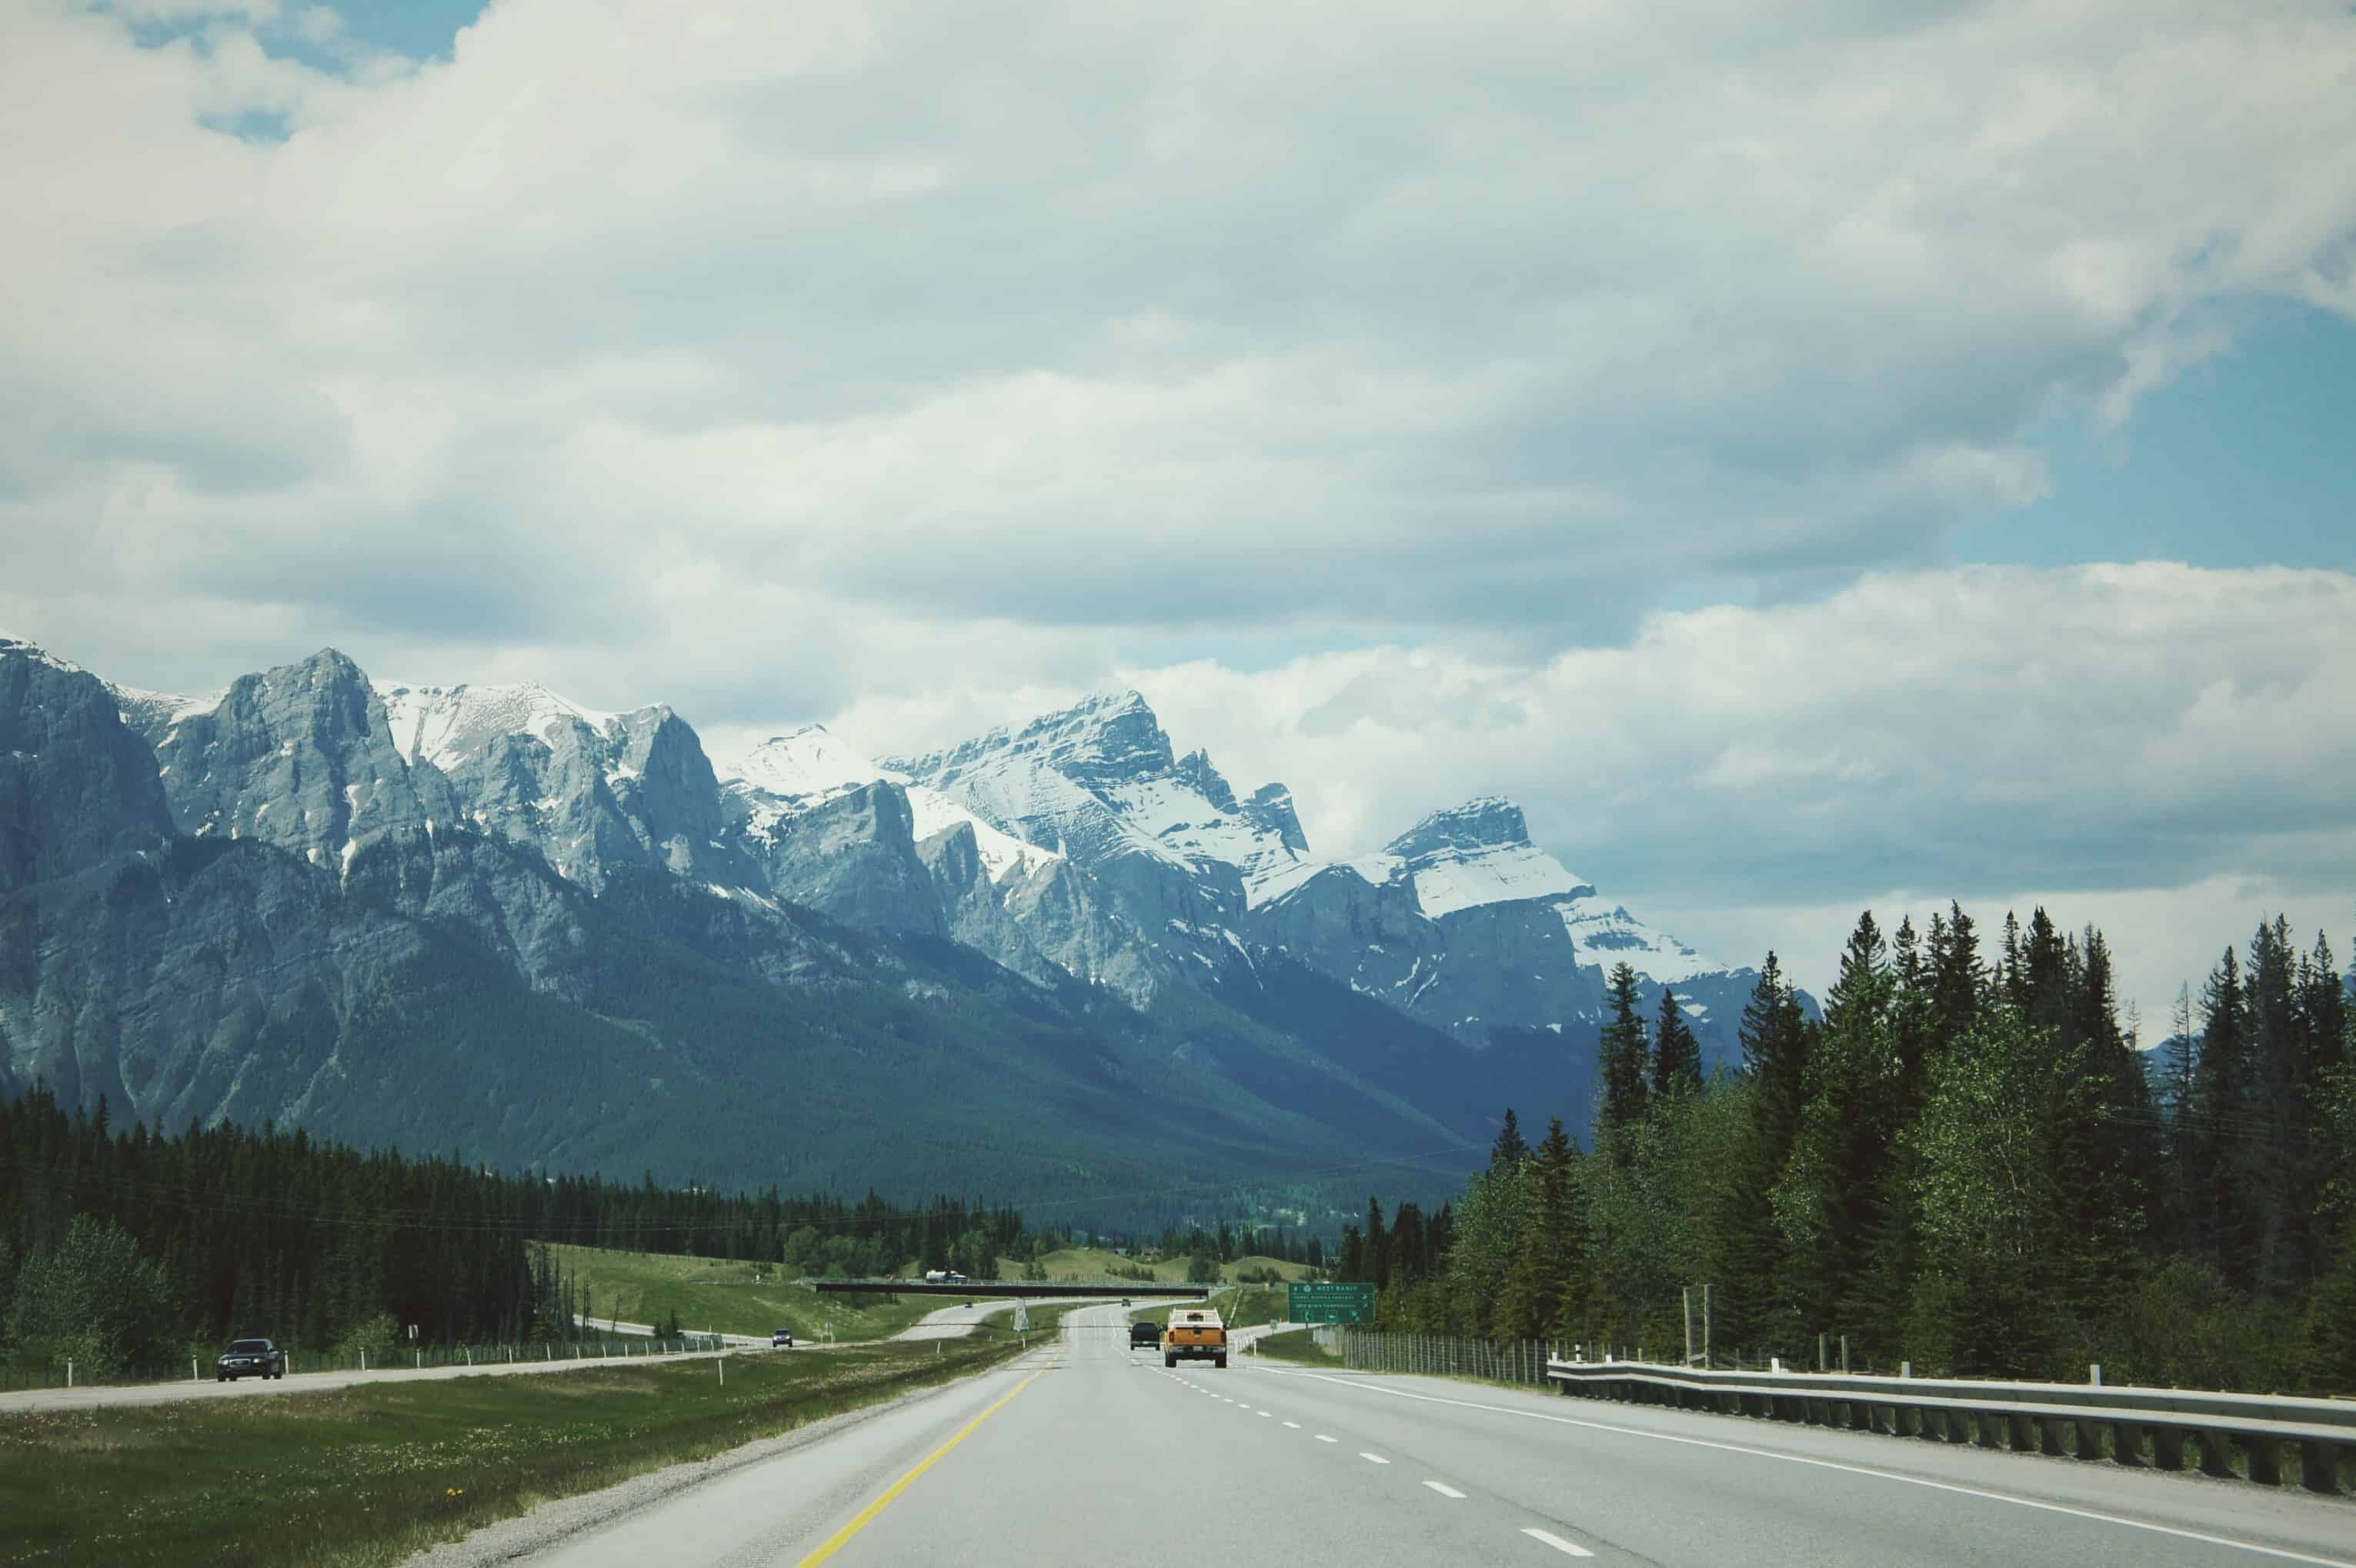 Northern Identity: Seeing the mountains from the road